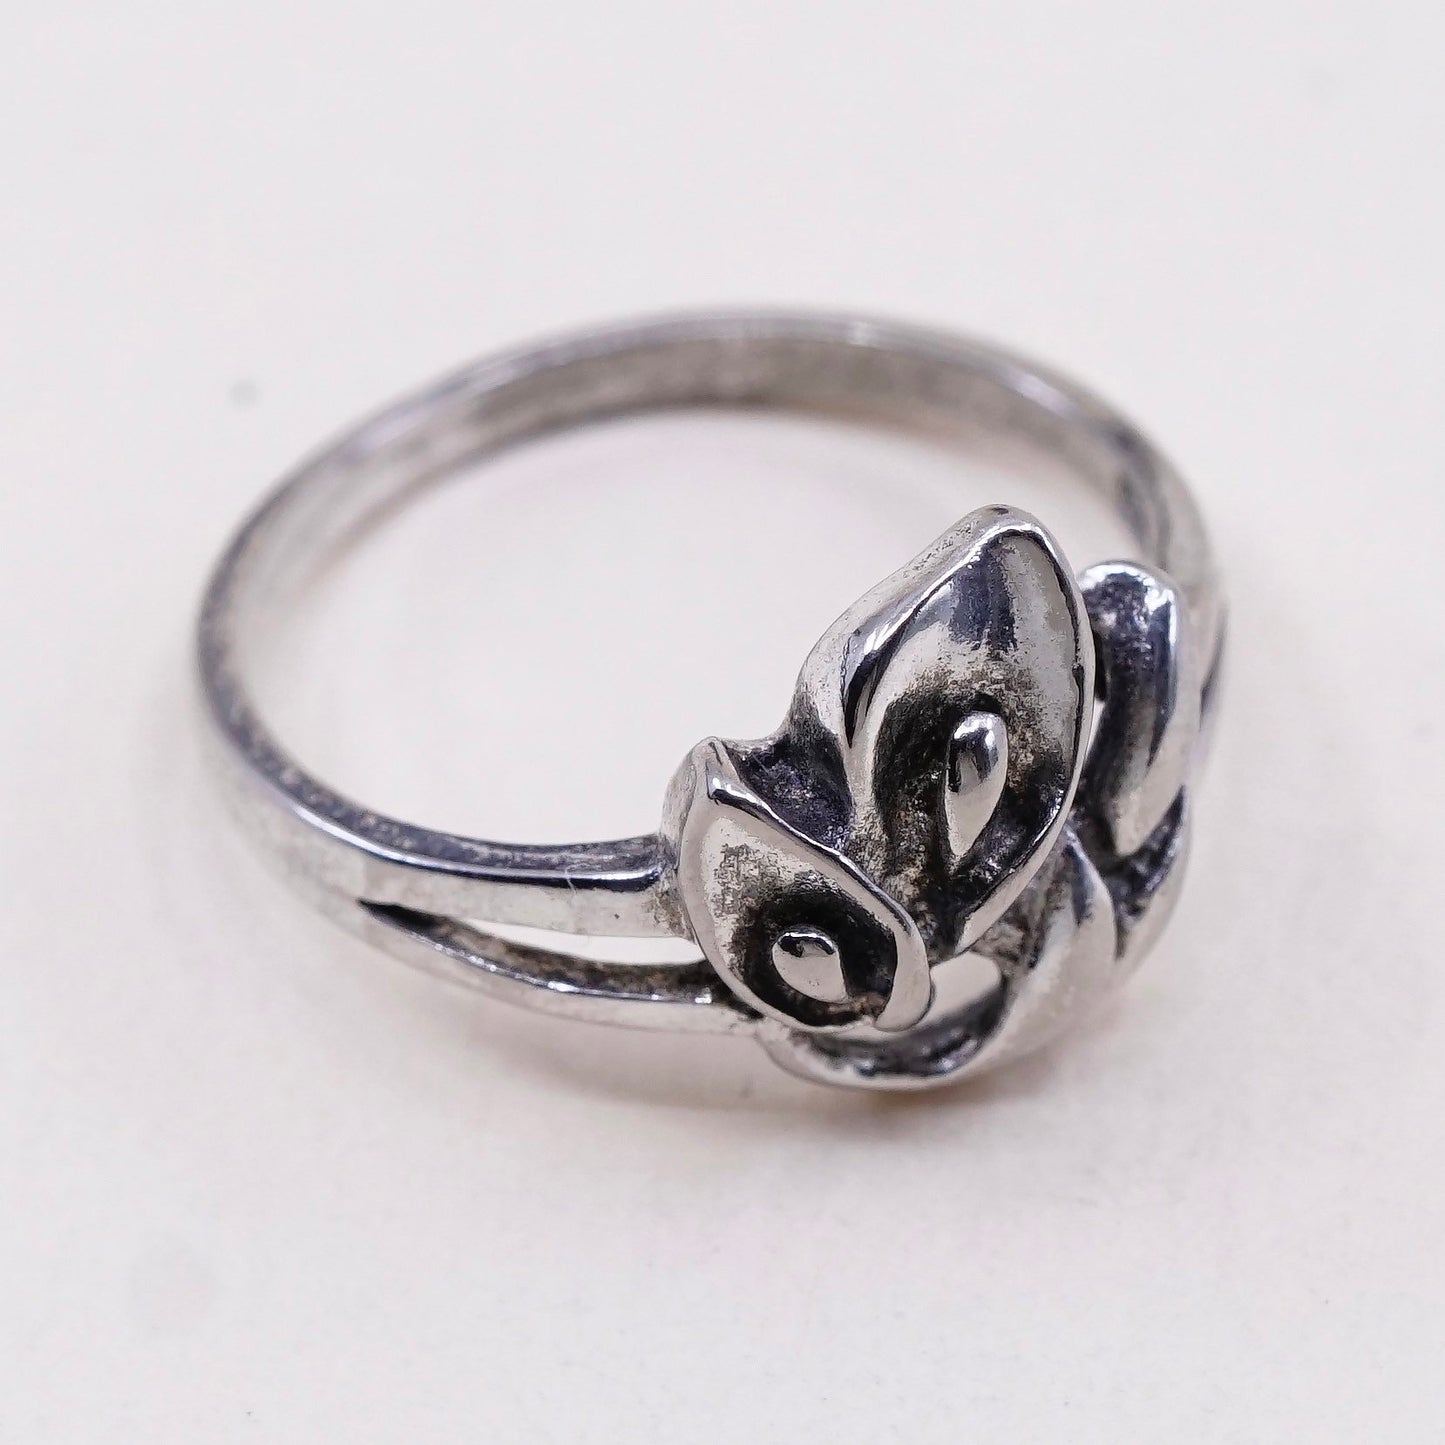 Size 6, vintage Sterling 925 silver handmade ring with lily flower